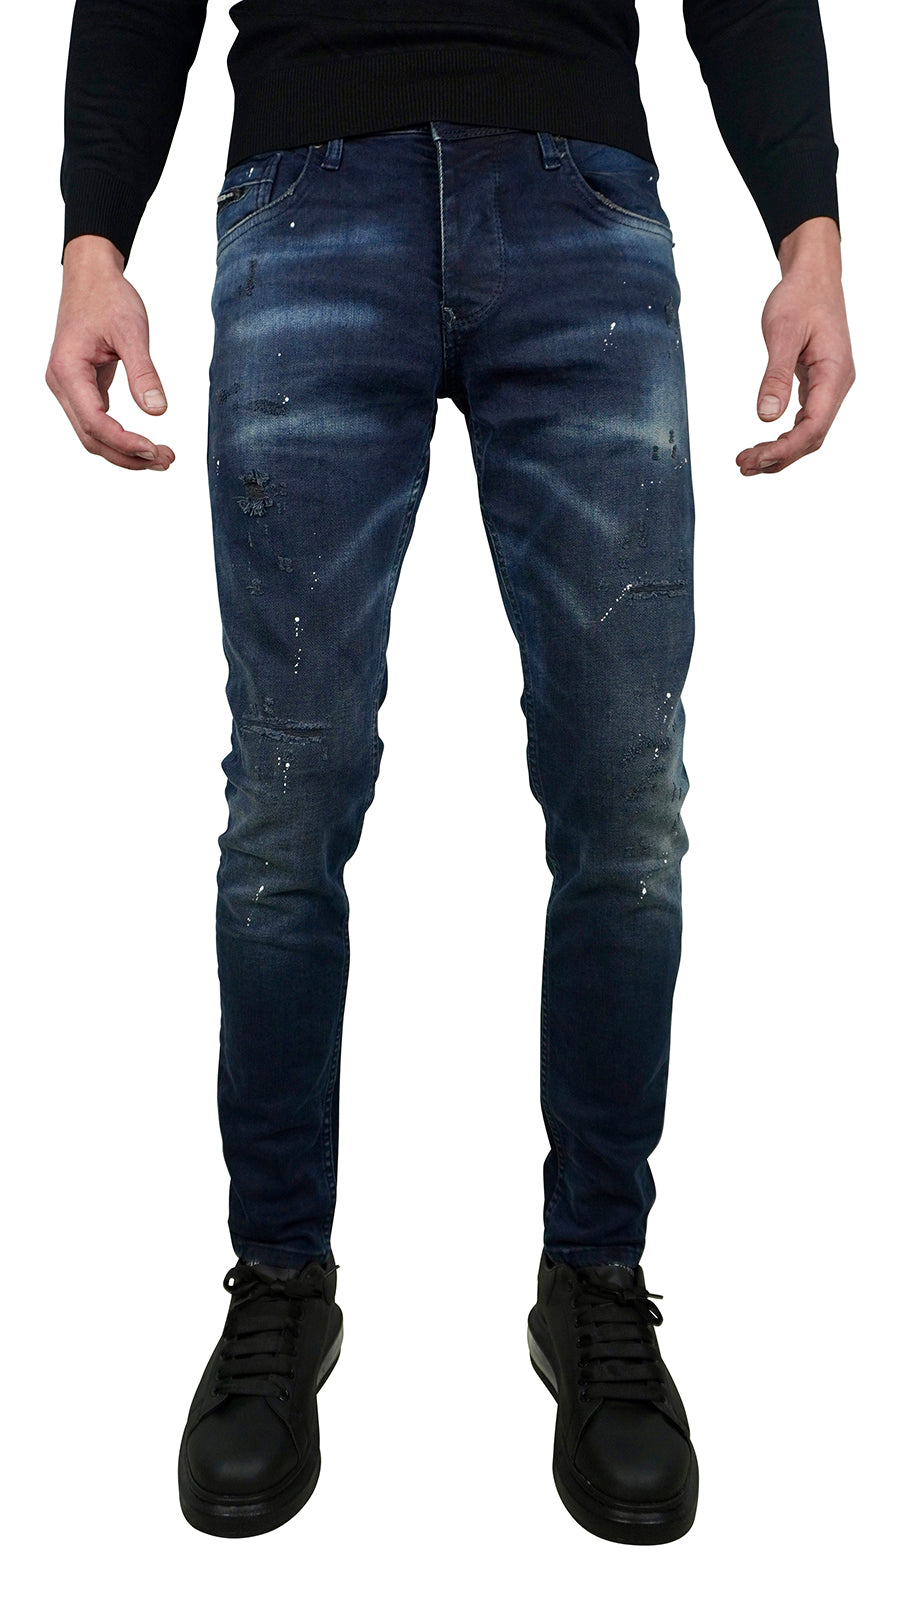 THE MIKES WHITE SPATTED JEANS - DARK BLUE